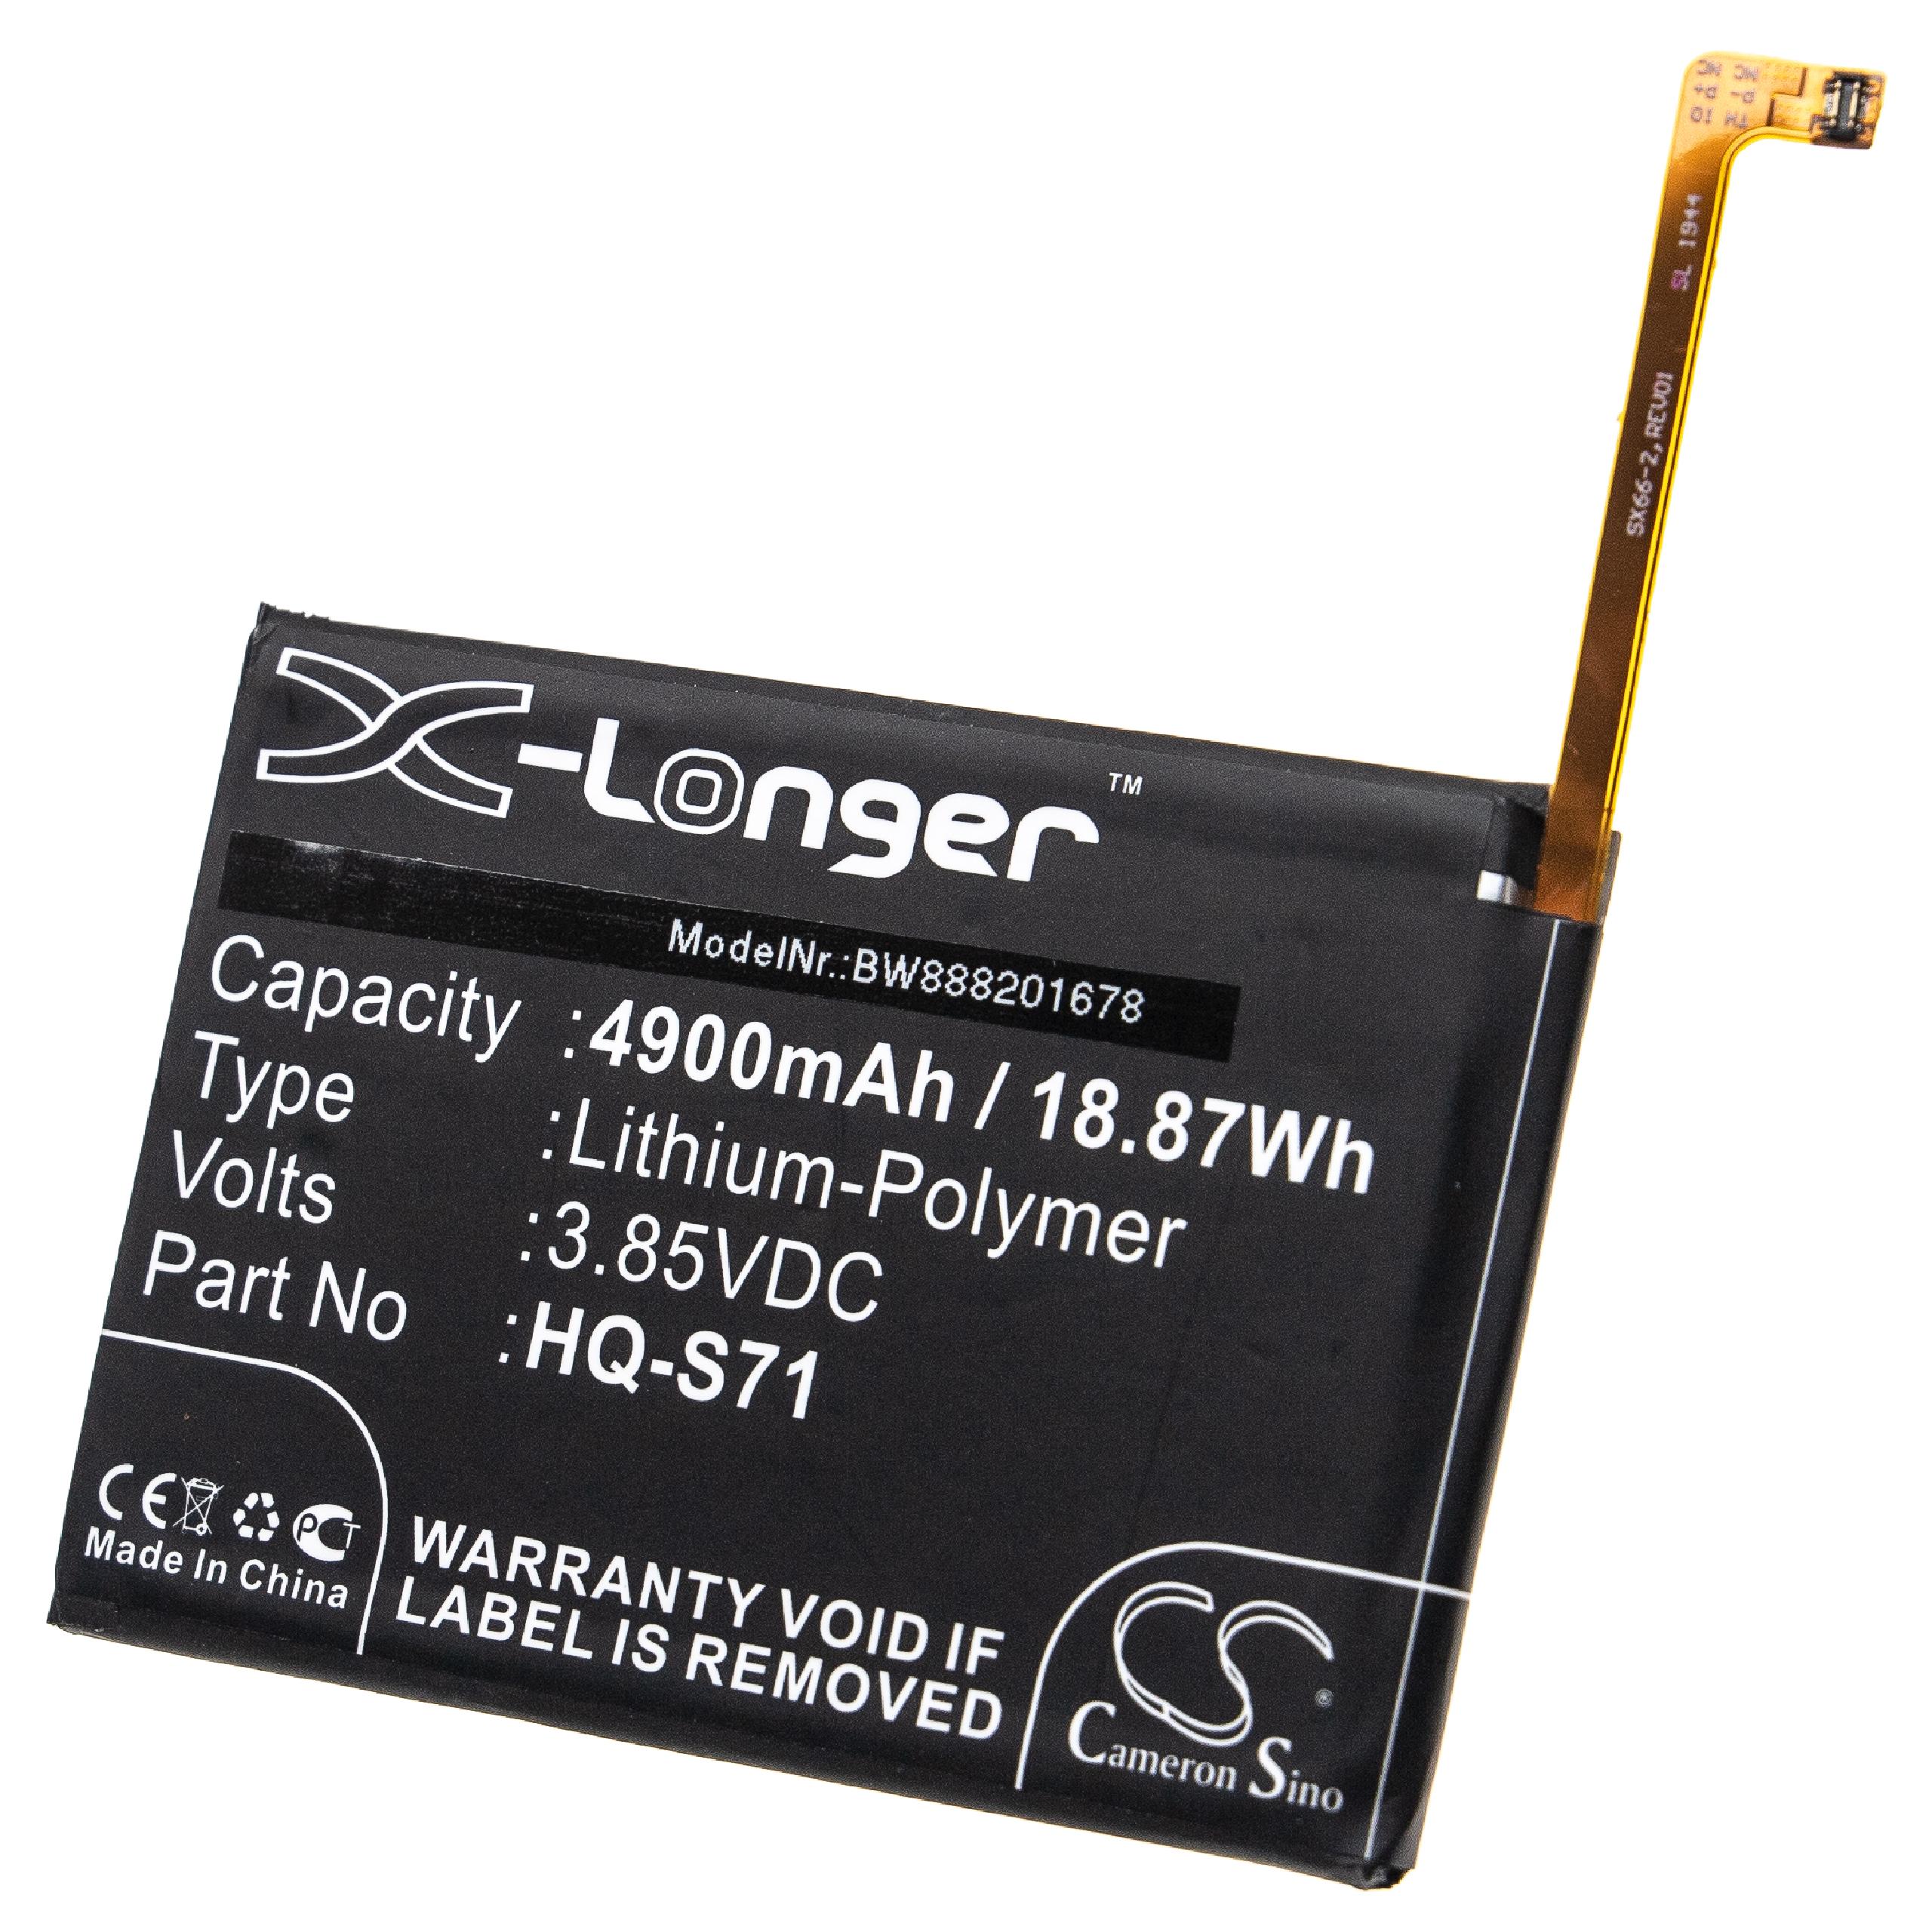 Mobile Phone Battery Replacement for Samsung GH81-18734A, HQ-S71 - 4900mAh 3.85V Li-polymer